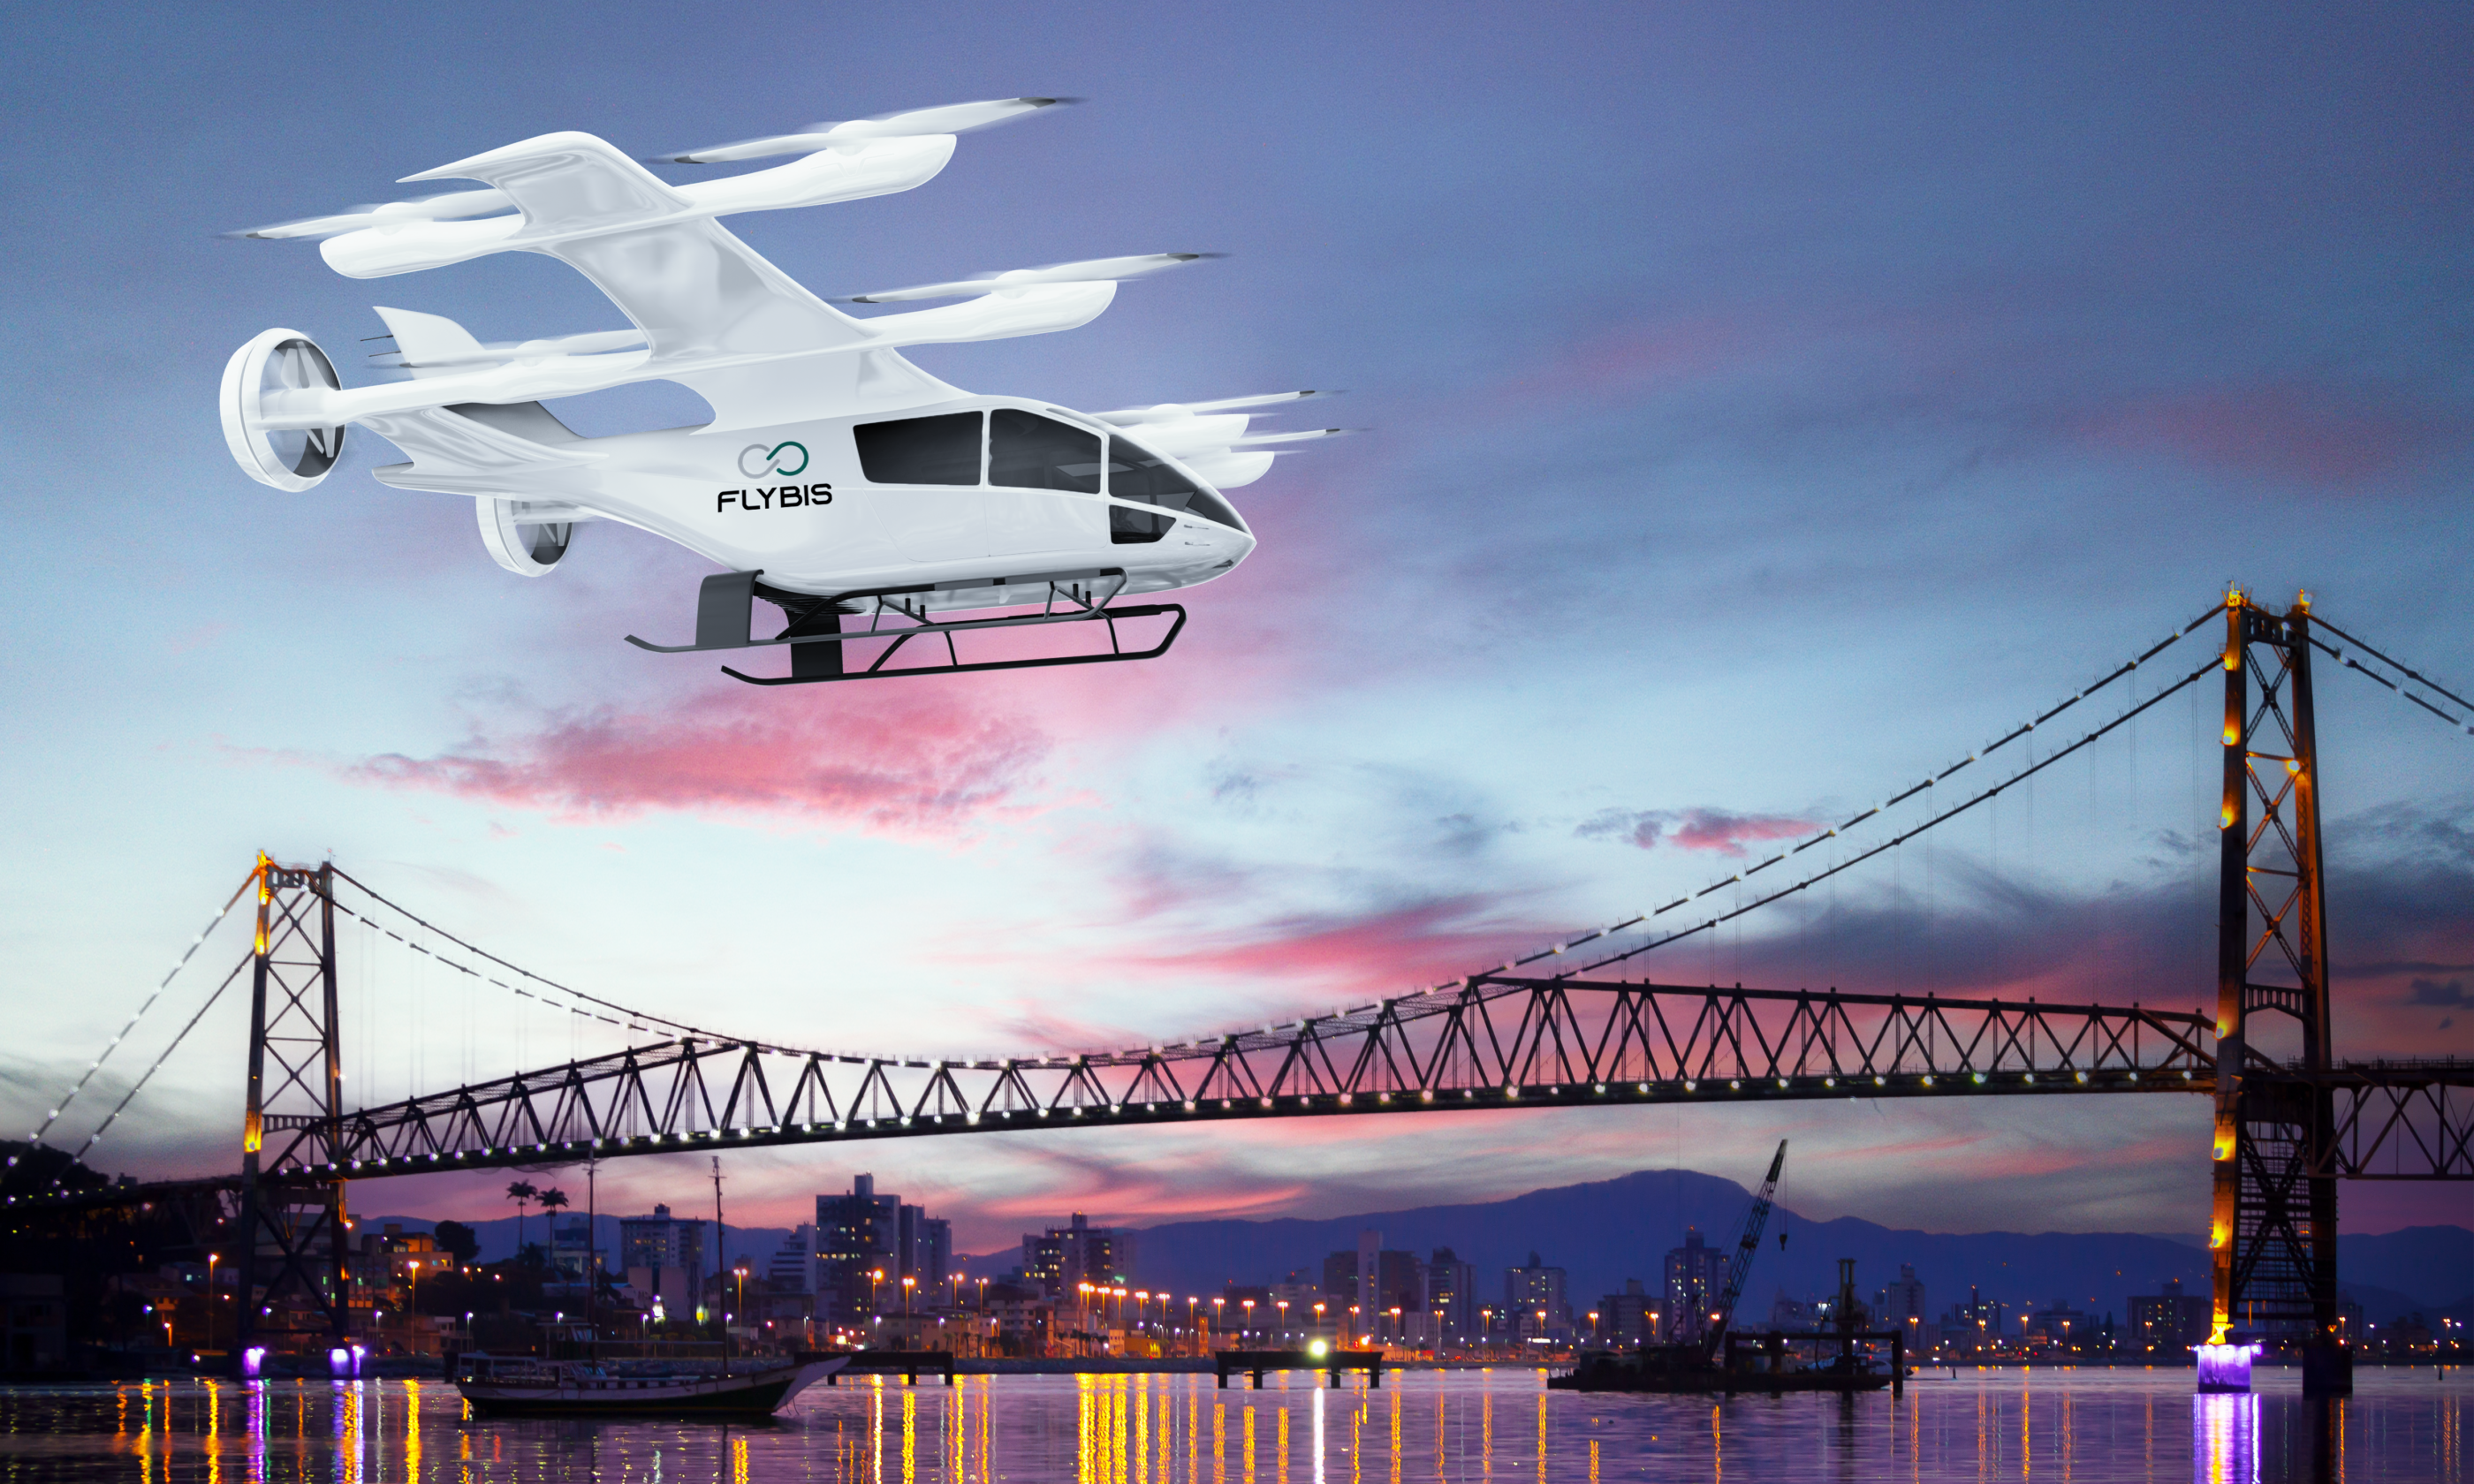 Eve and FlyBIS announce LOI to develop eVTOL operations in Brazil & Latin America